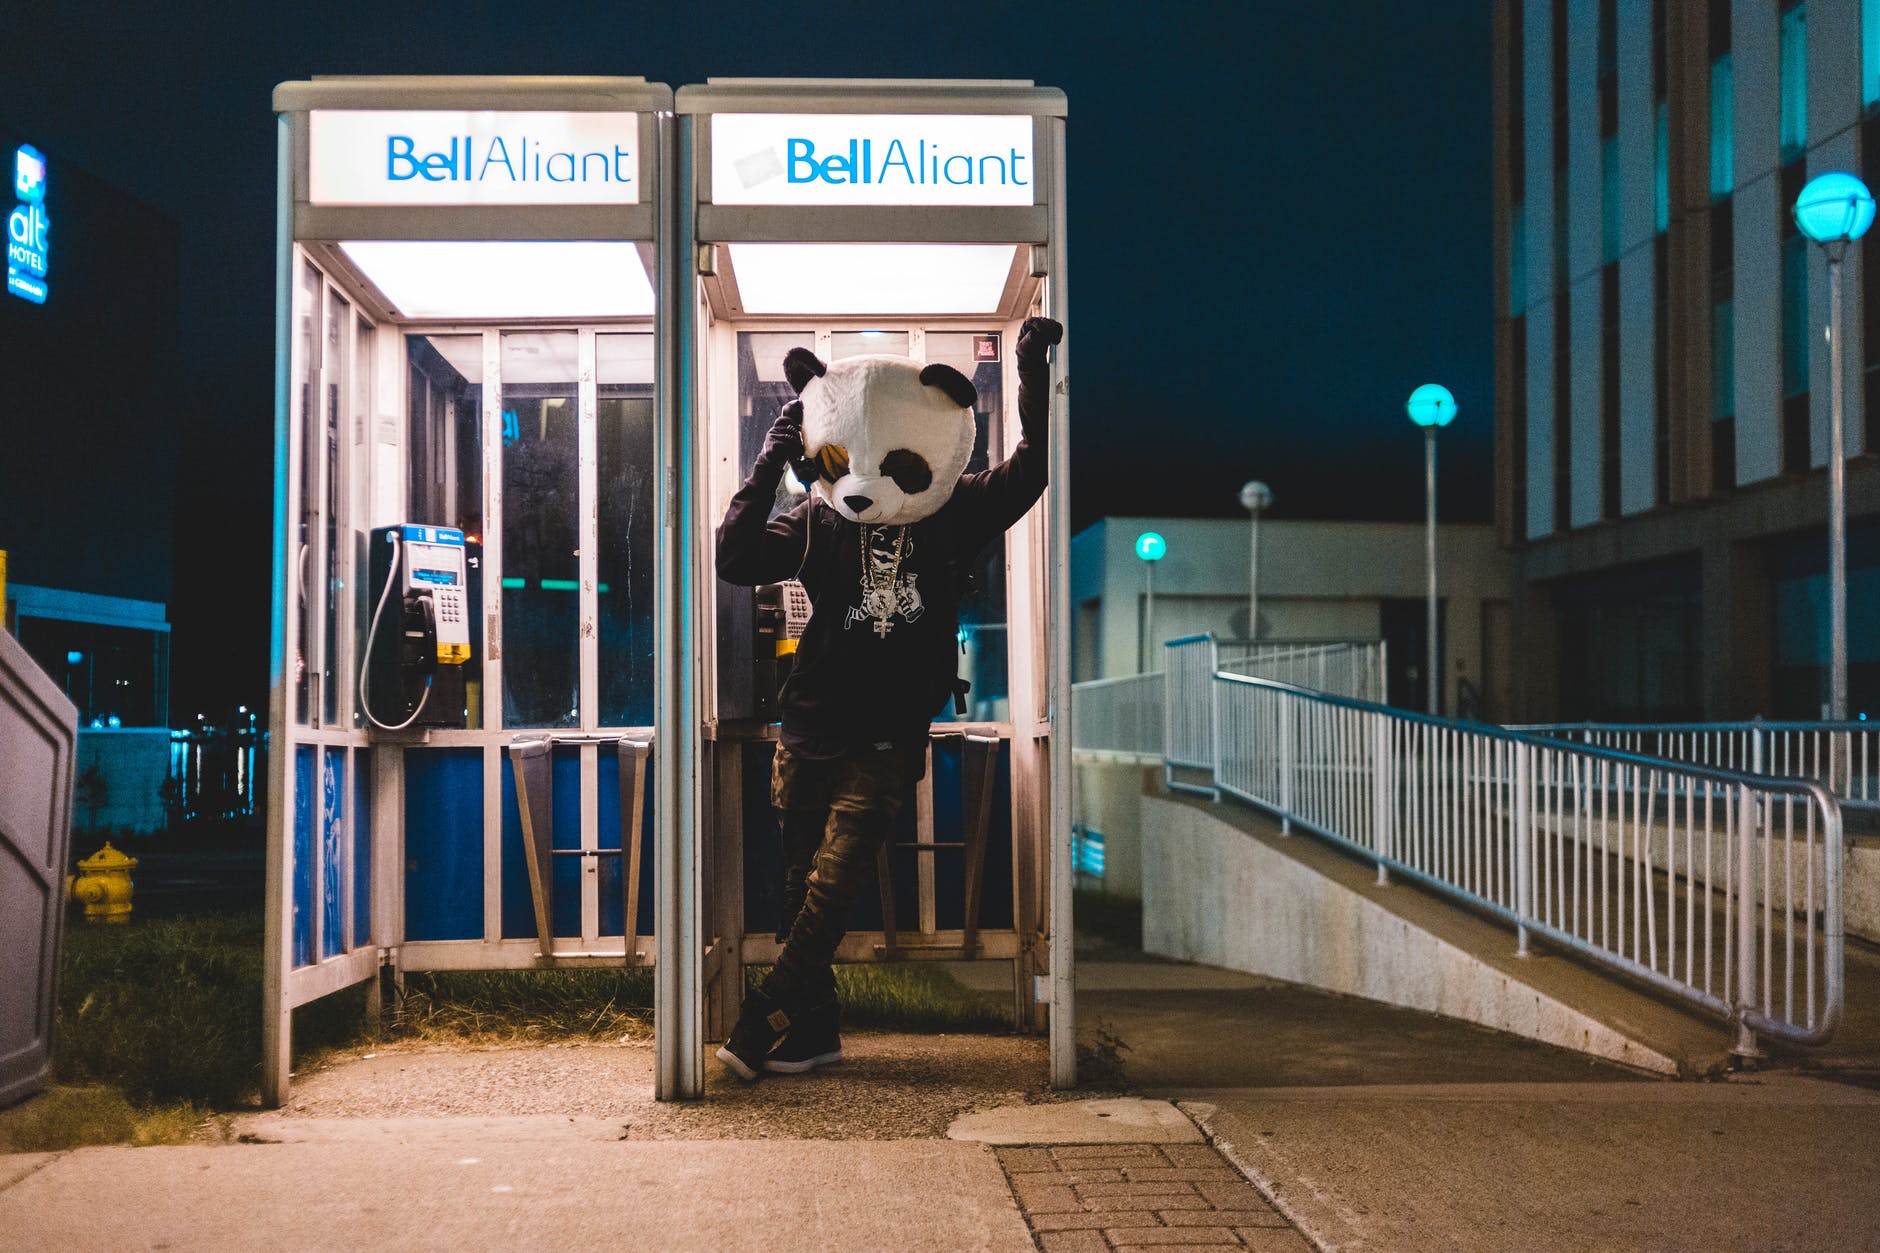 man in black and white panda costume standing on payphone booth during night time